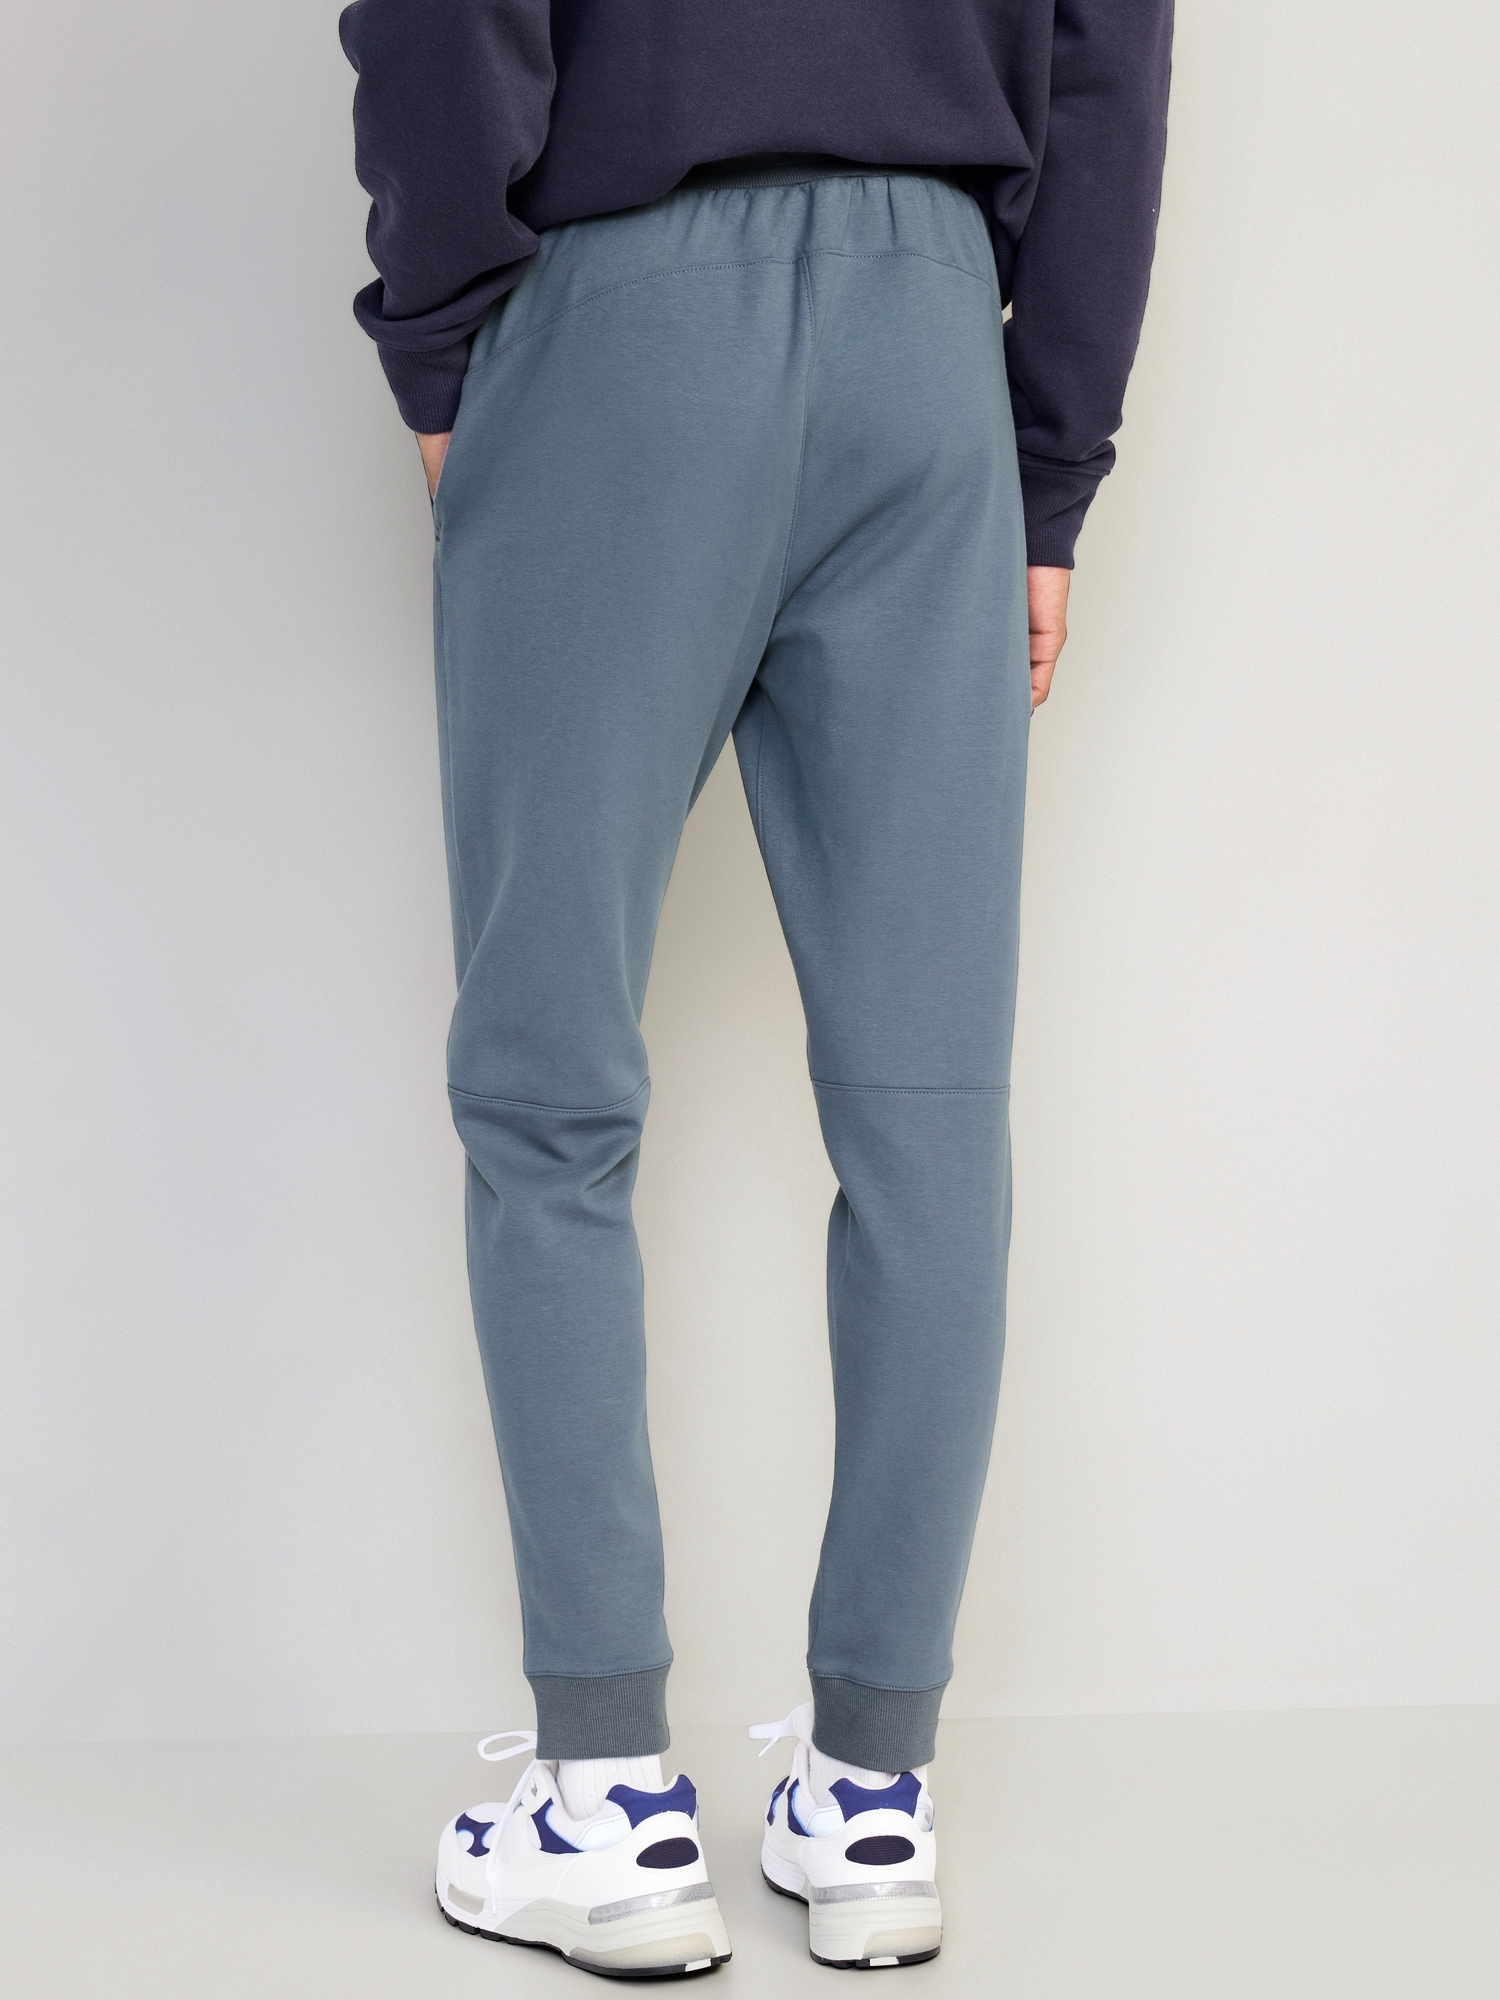 Old Navy High-Waisted Dynamic Fleece Jogger Sweatpants in Ocean Shale 4X  NWT Blue - $40 New With Tags - From Tinnie